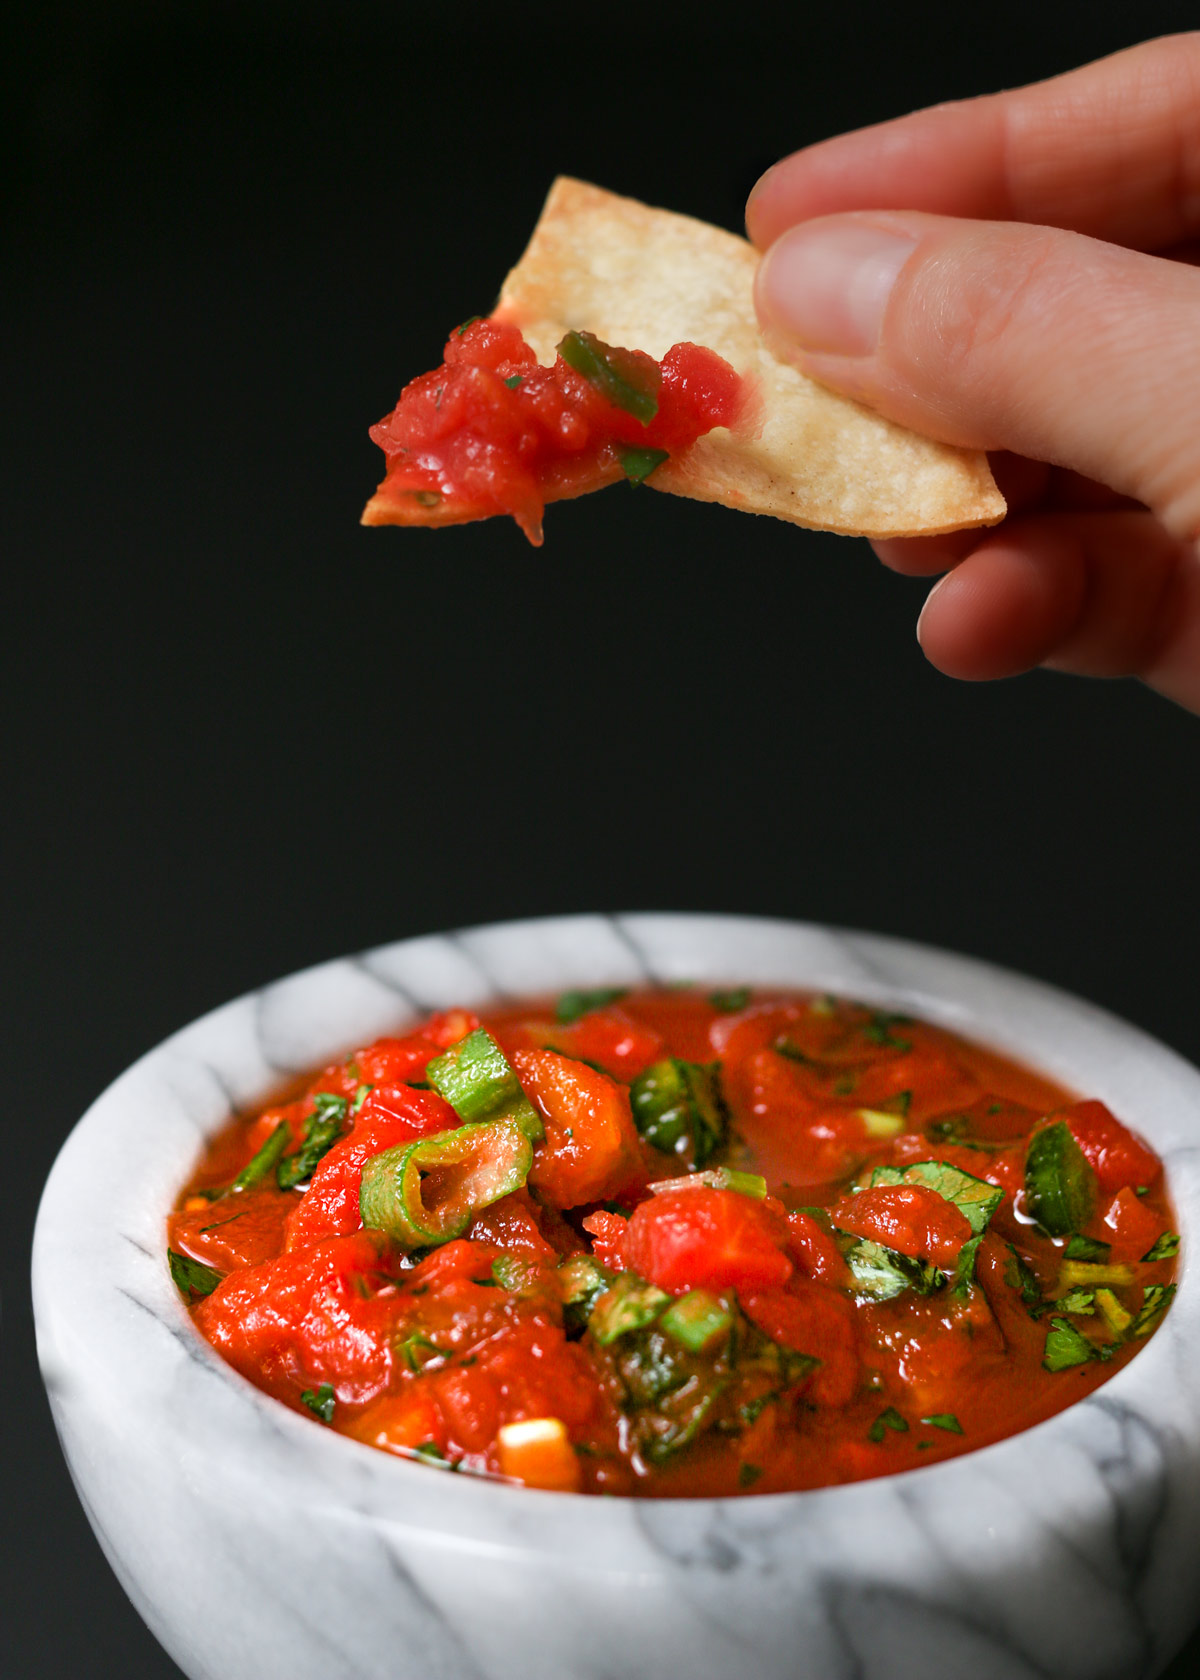 hand holding a chip with salsa over a bowl of salsa.